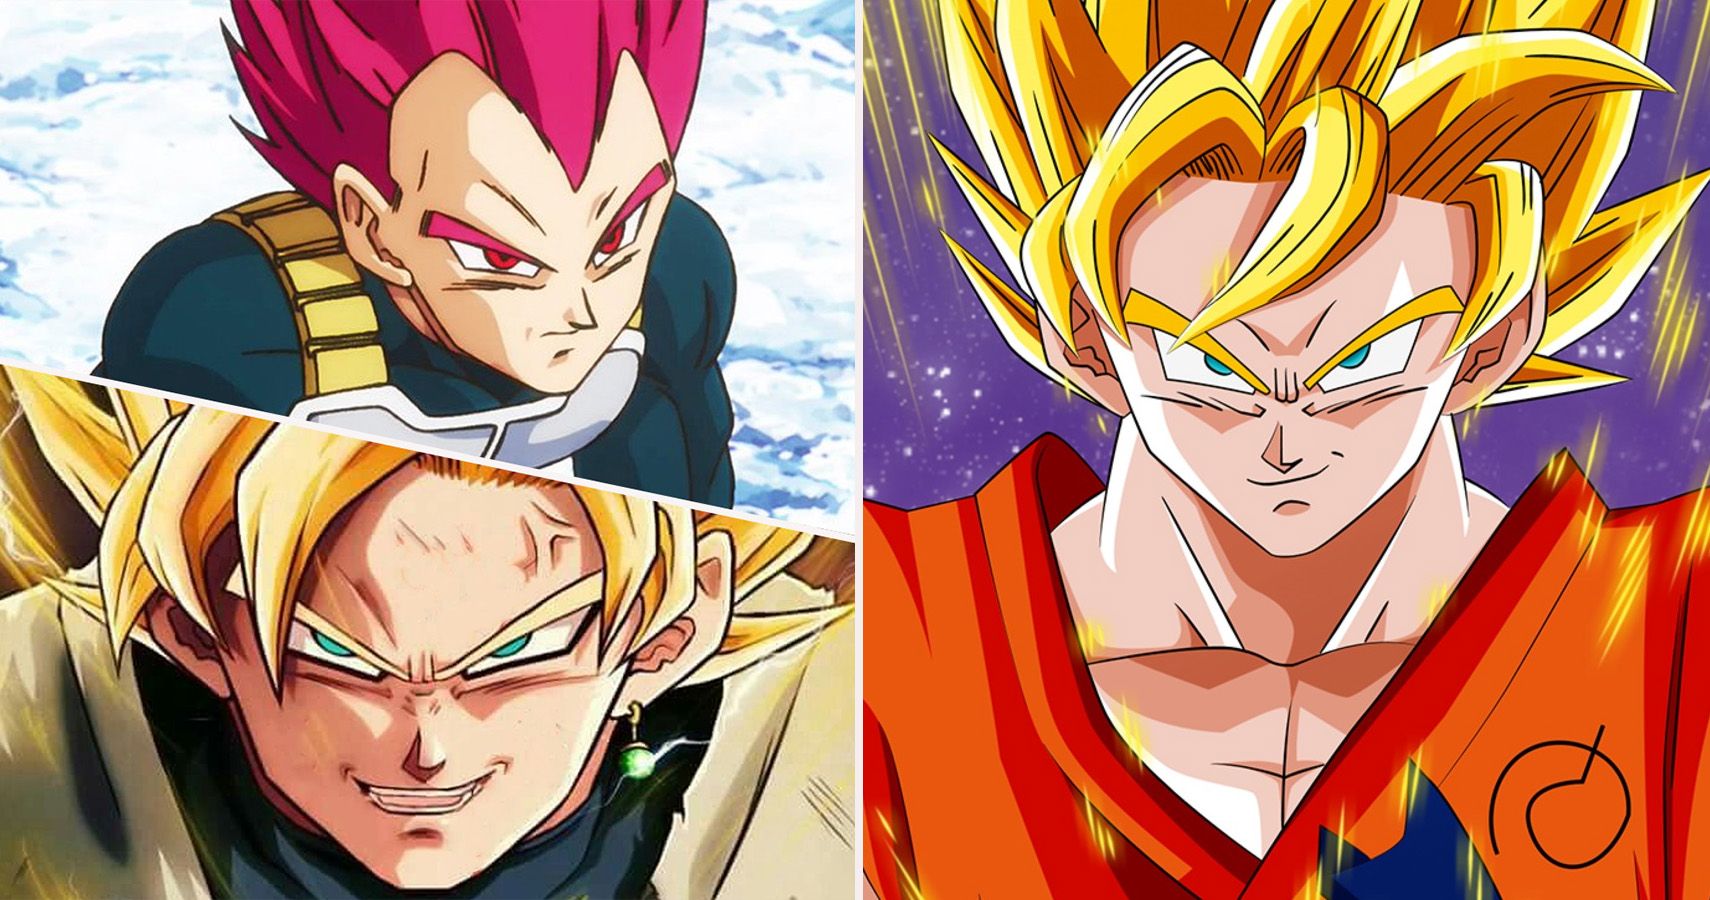 Dragon Ball: The 8 Most Powerful Super Saiyan Forms (And The 5 Weakest)